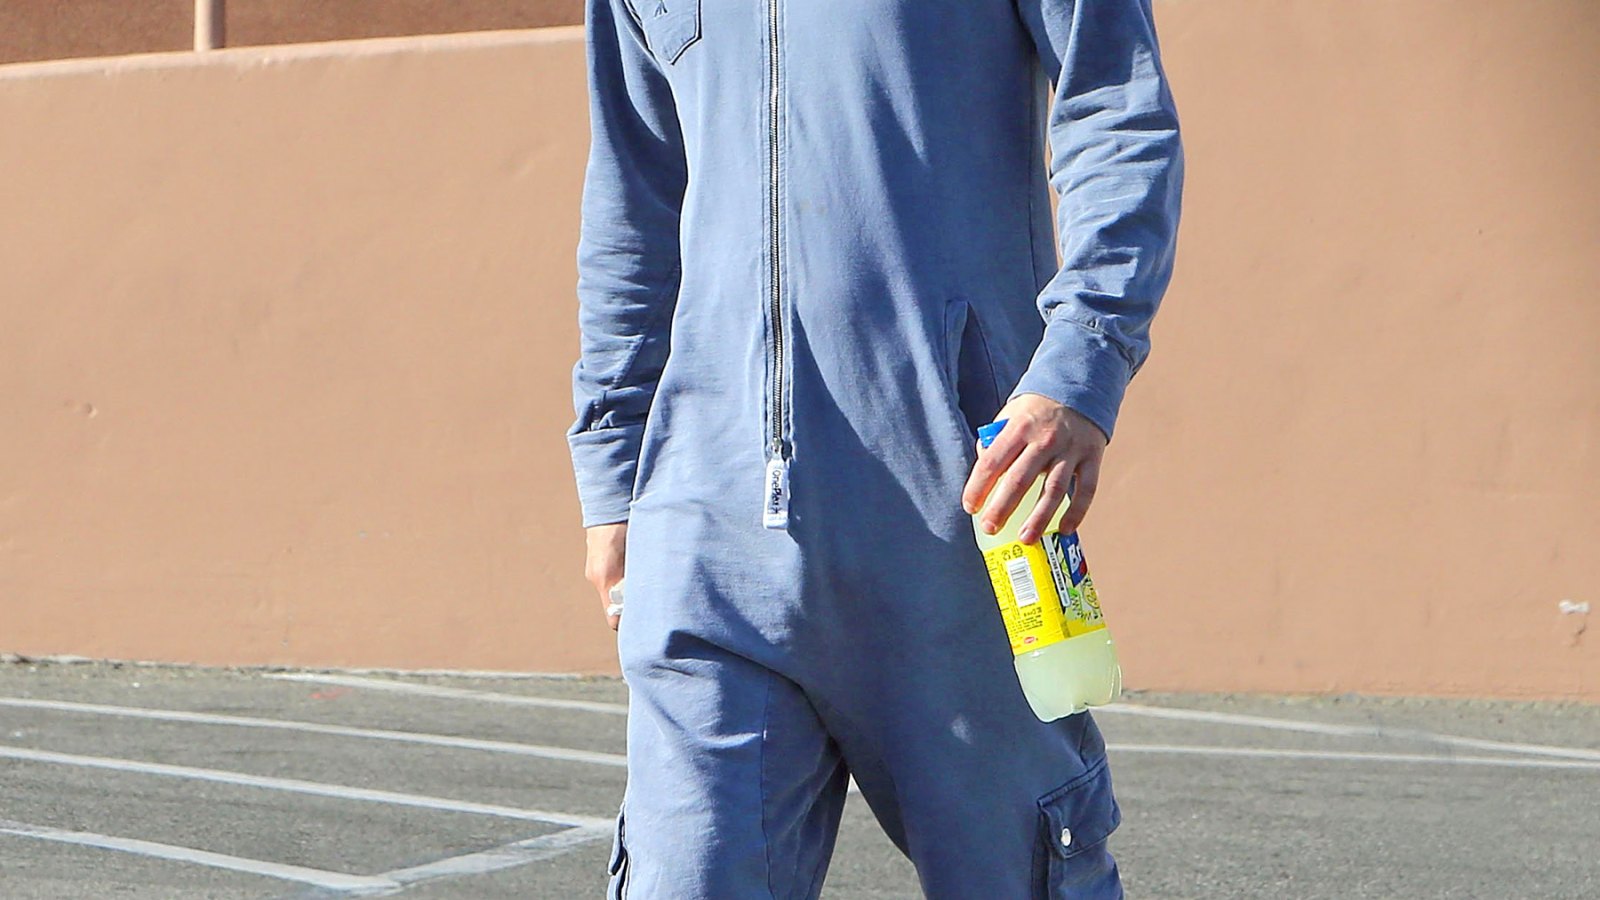 Jesse McCartney leaves Rite Aid in Hollywood on March 26, 2014